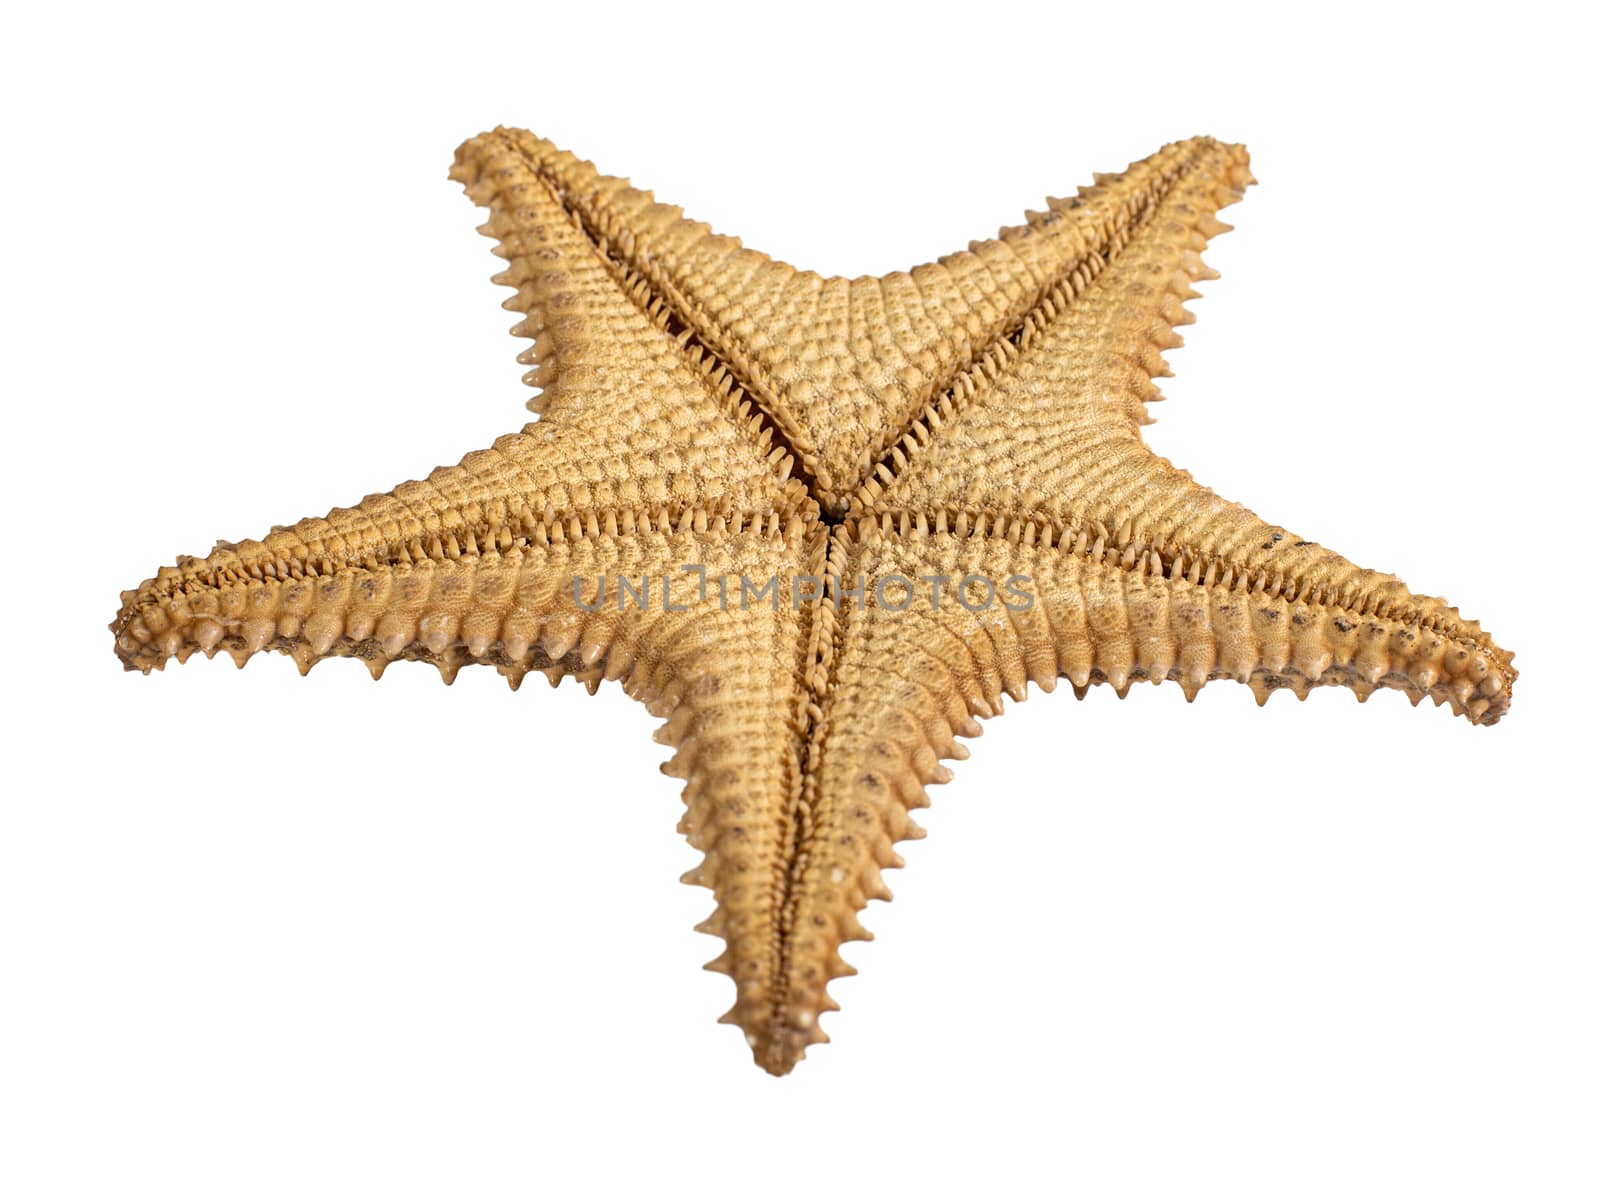 starfish isolated on a white background. Close-up. Bottom view by 977_ReX_977